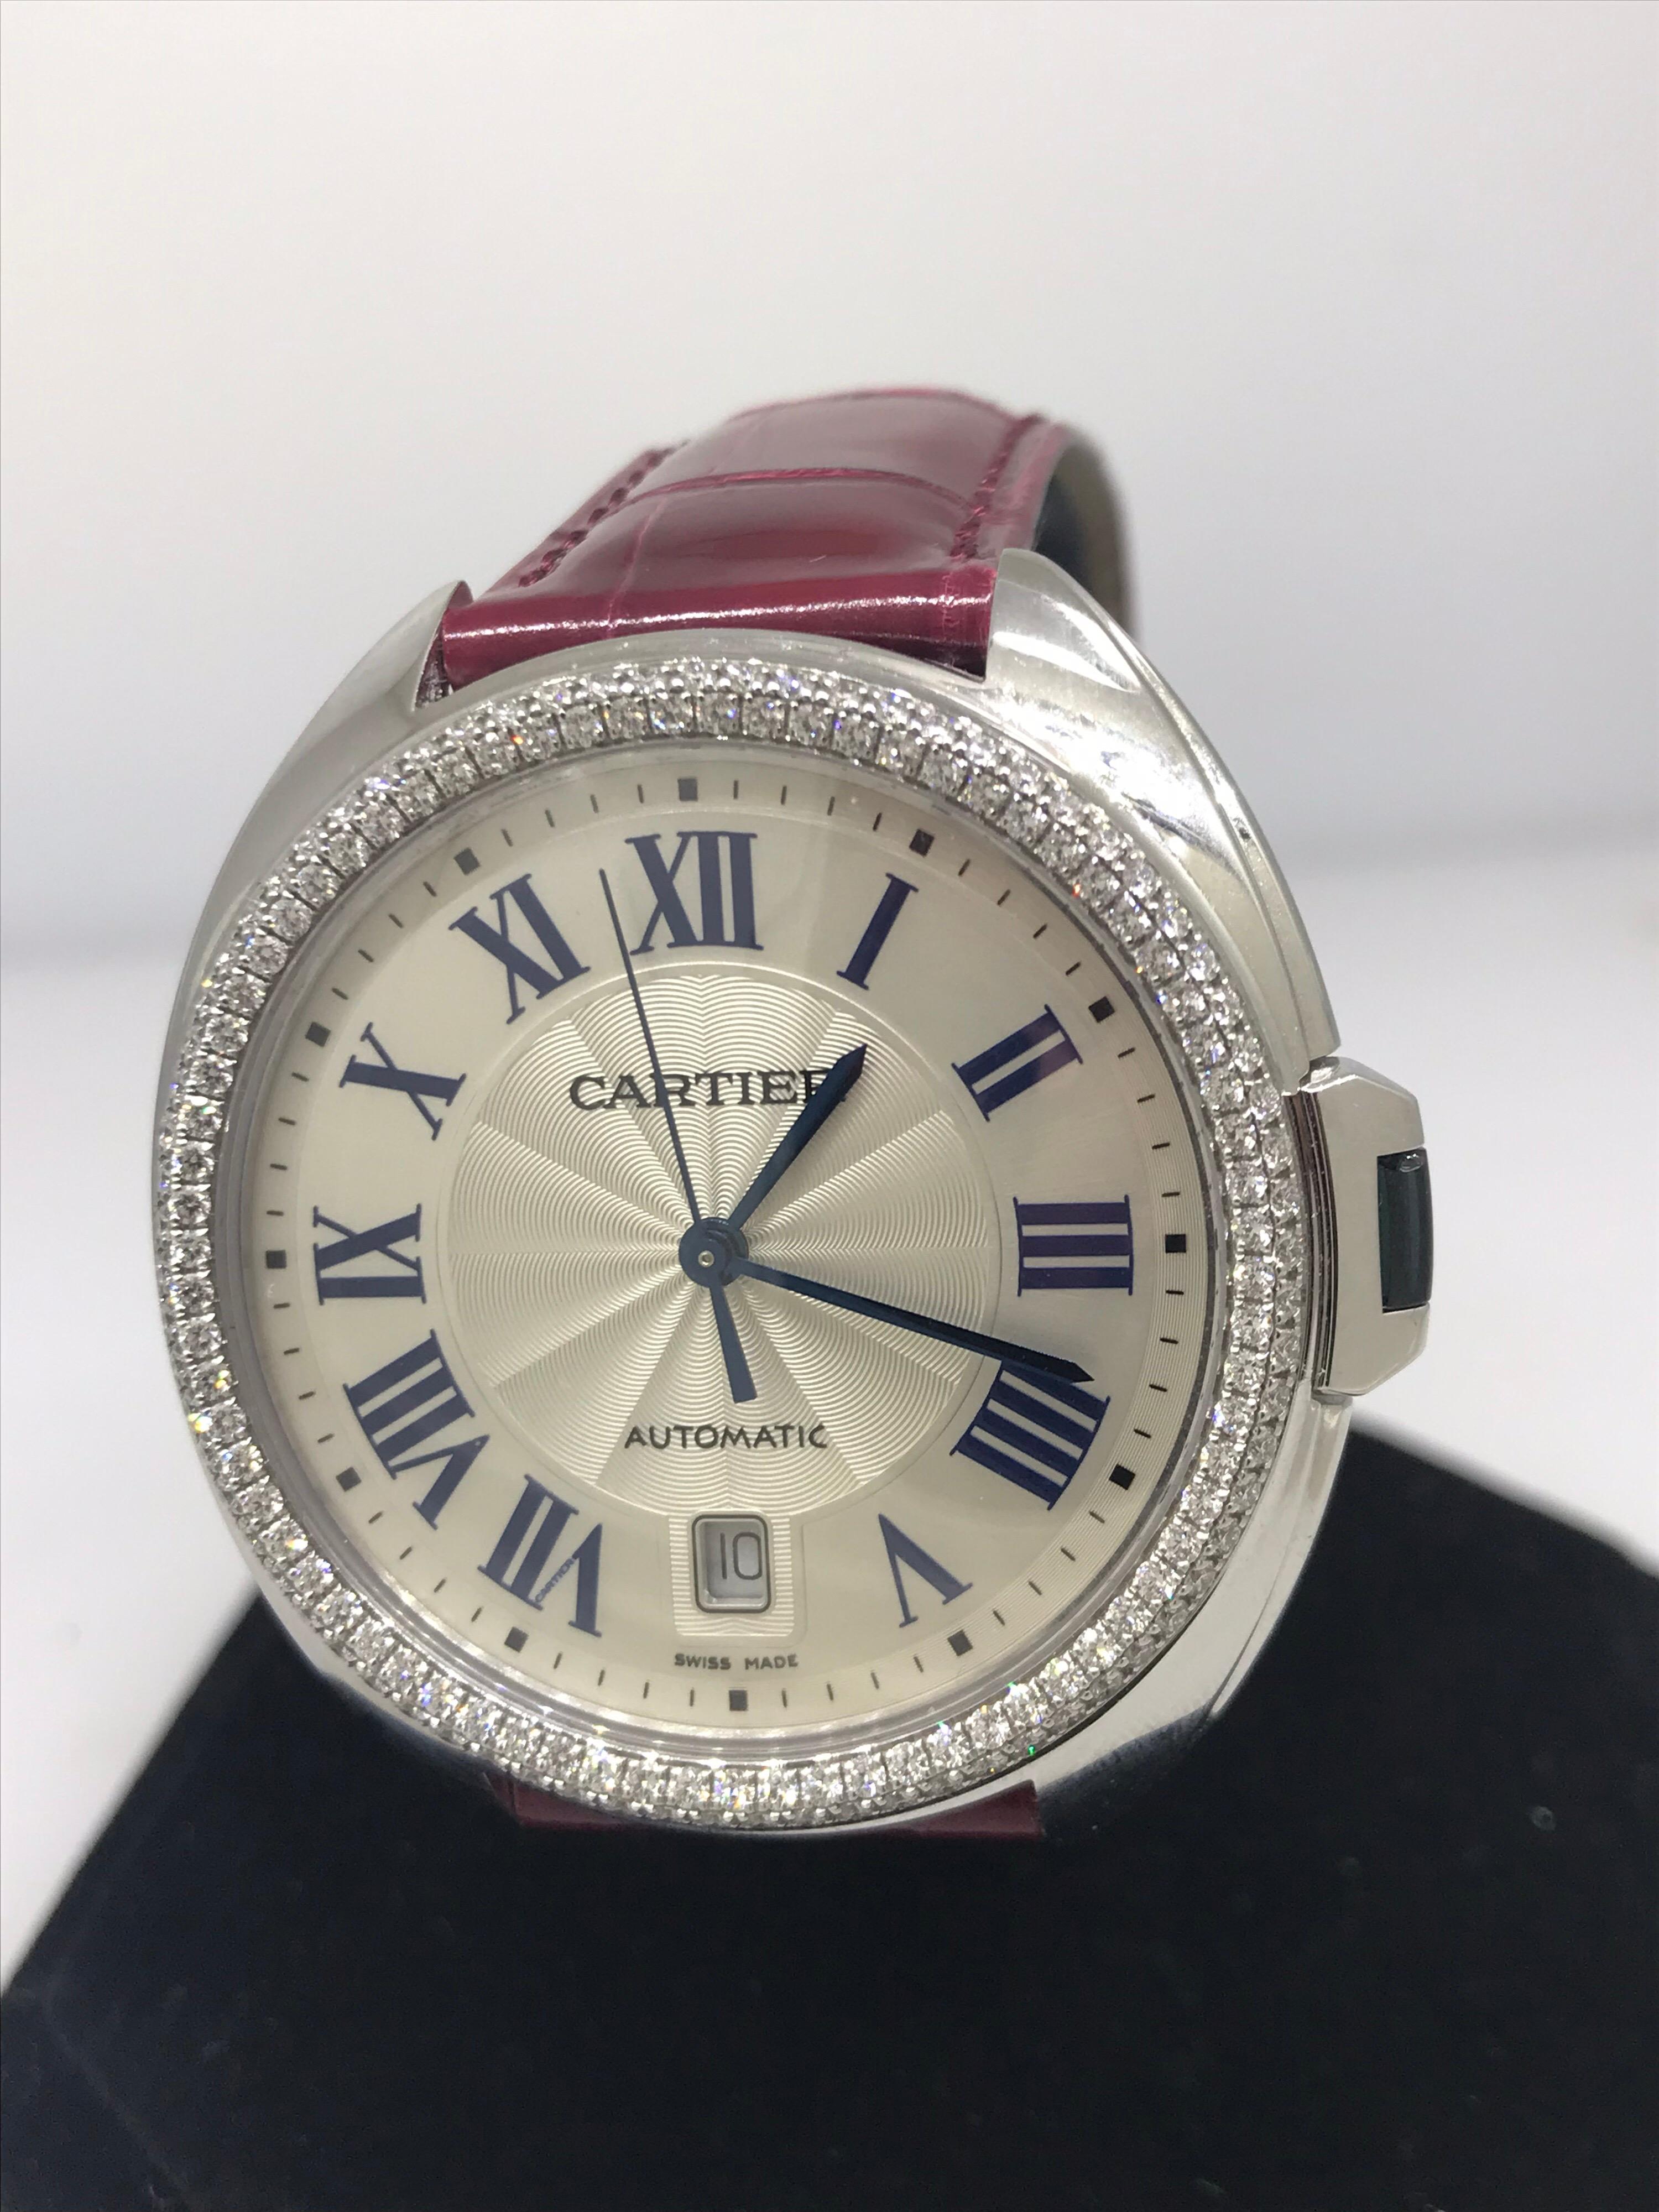 Women's or Men's Cartier Cle White Gold Diamond Bezel Automatic Ladies Watch WJCL0011 Brand New For Sale